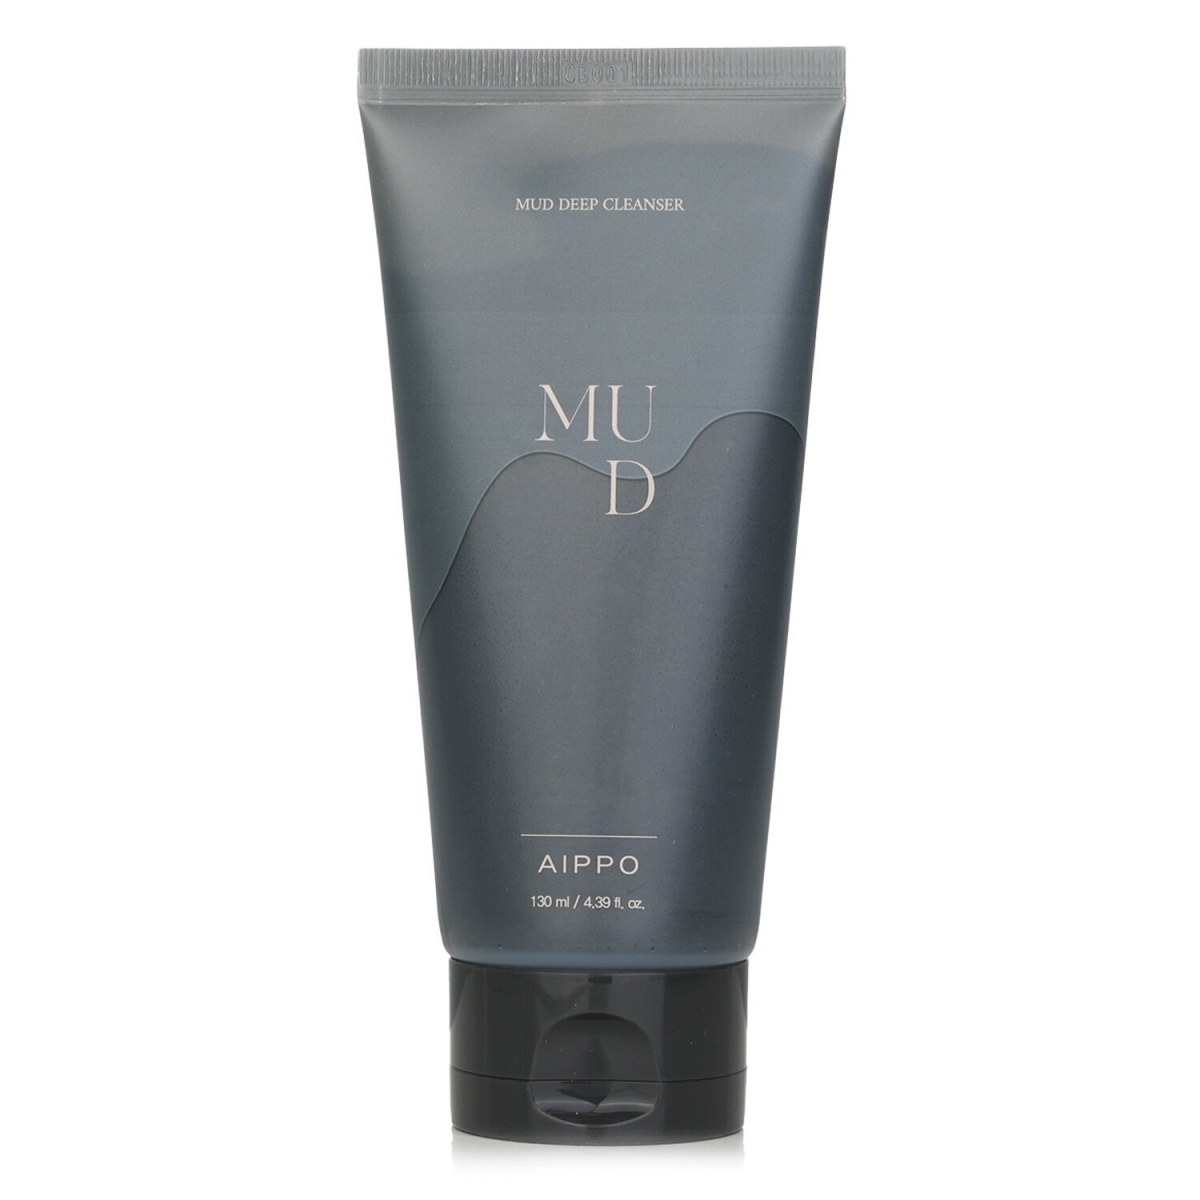 Picture of Aippo 302917 130 ml Mud Deep Cleanser